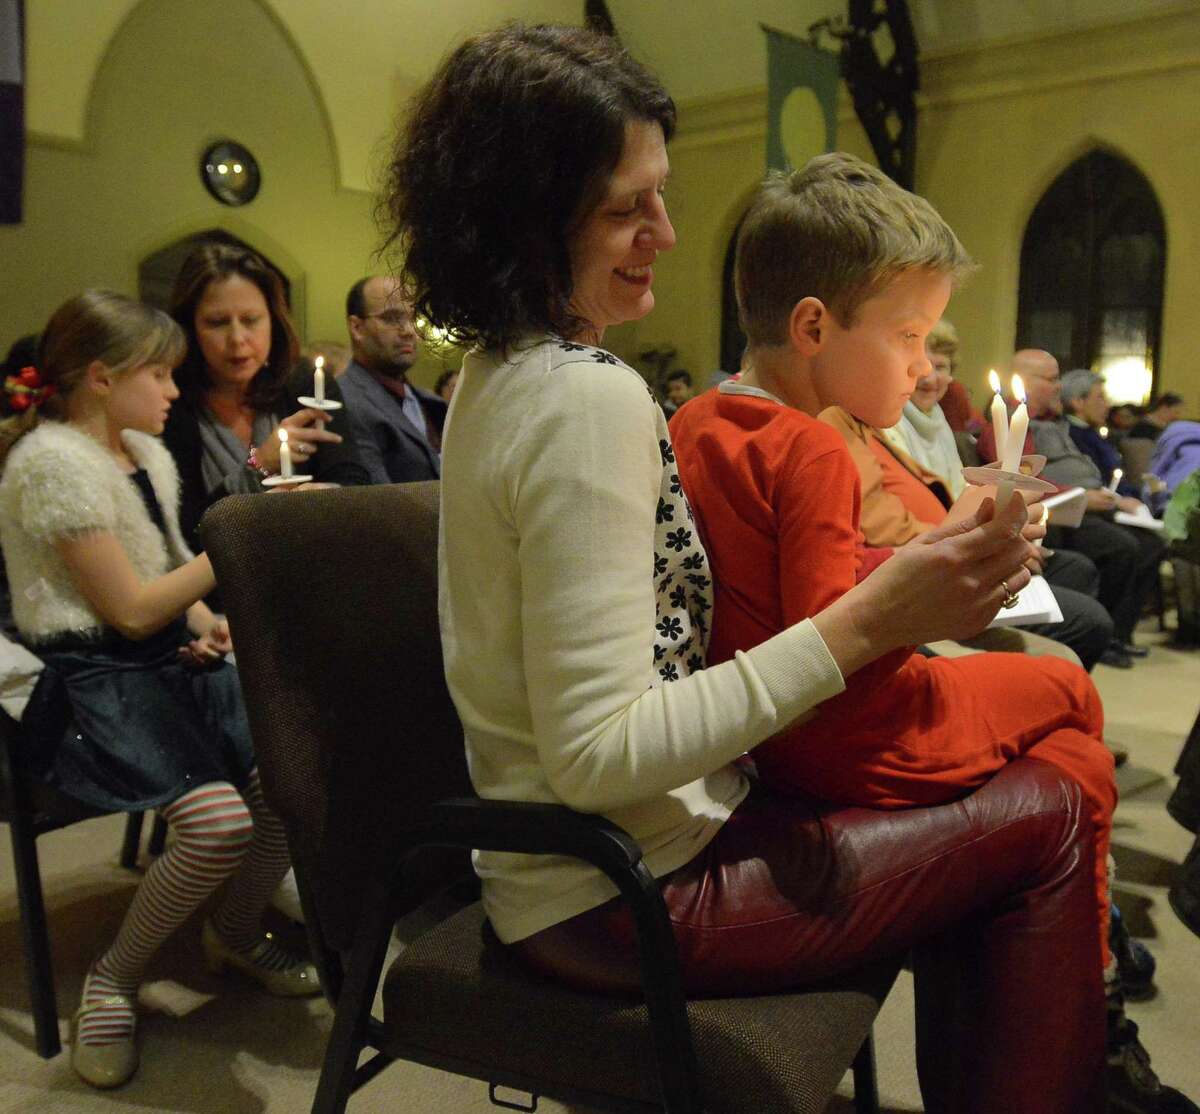 Basil Lintern, 7, of Stamford sits on the lap of his mother, Celeste Frye-Lintern, as they hold lighted candles as part of a Christmas Eve service. The Unitarian Universalist Congregation in Stamford holds "Fear Not Good News, Great Joy, For All People," a "Christmas Eve Carol" and candlelight service in Stamford on Dec.24, 2016.